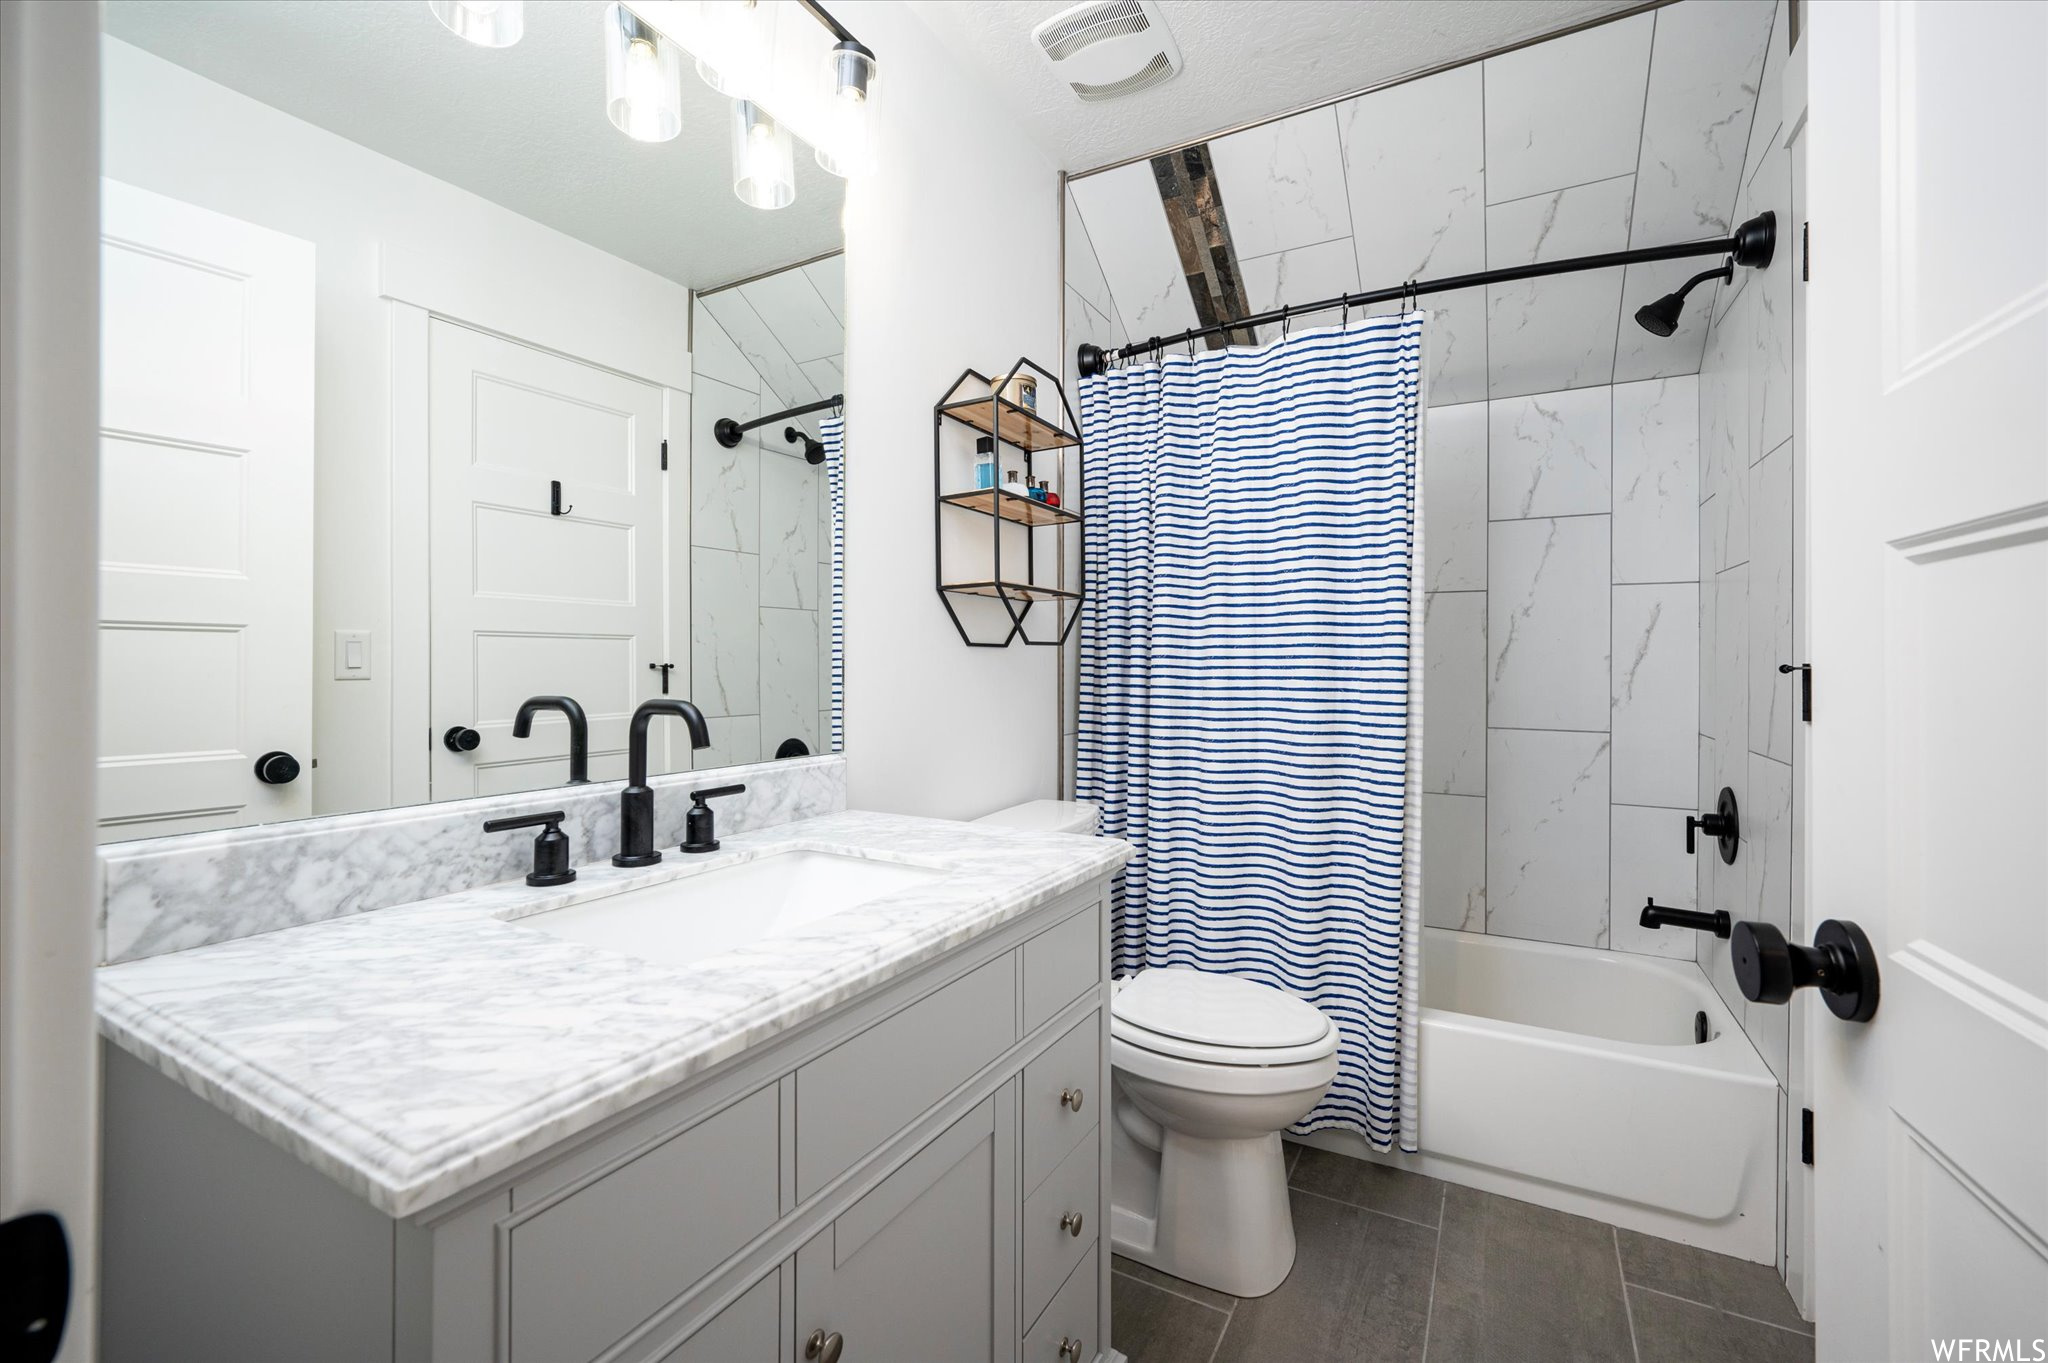 Full bathroom with toilet, vanity with extensive cabinet space, tile flooring, and shower / bath combo